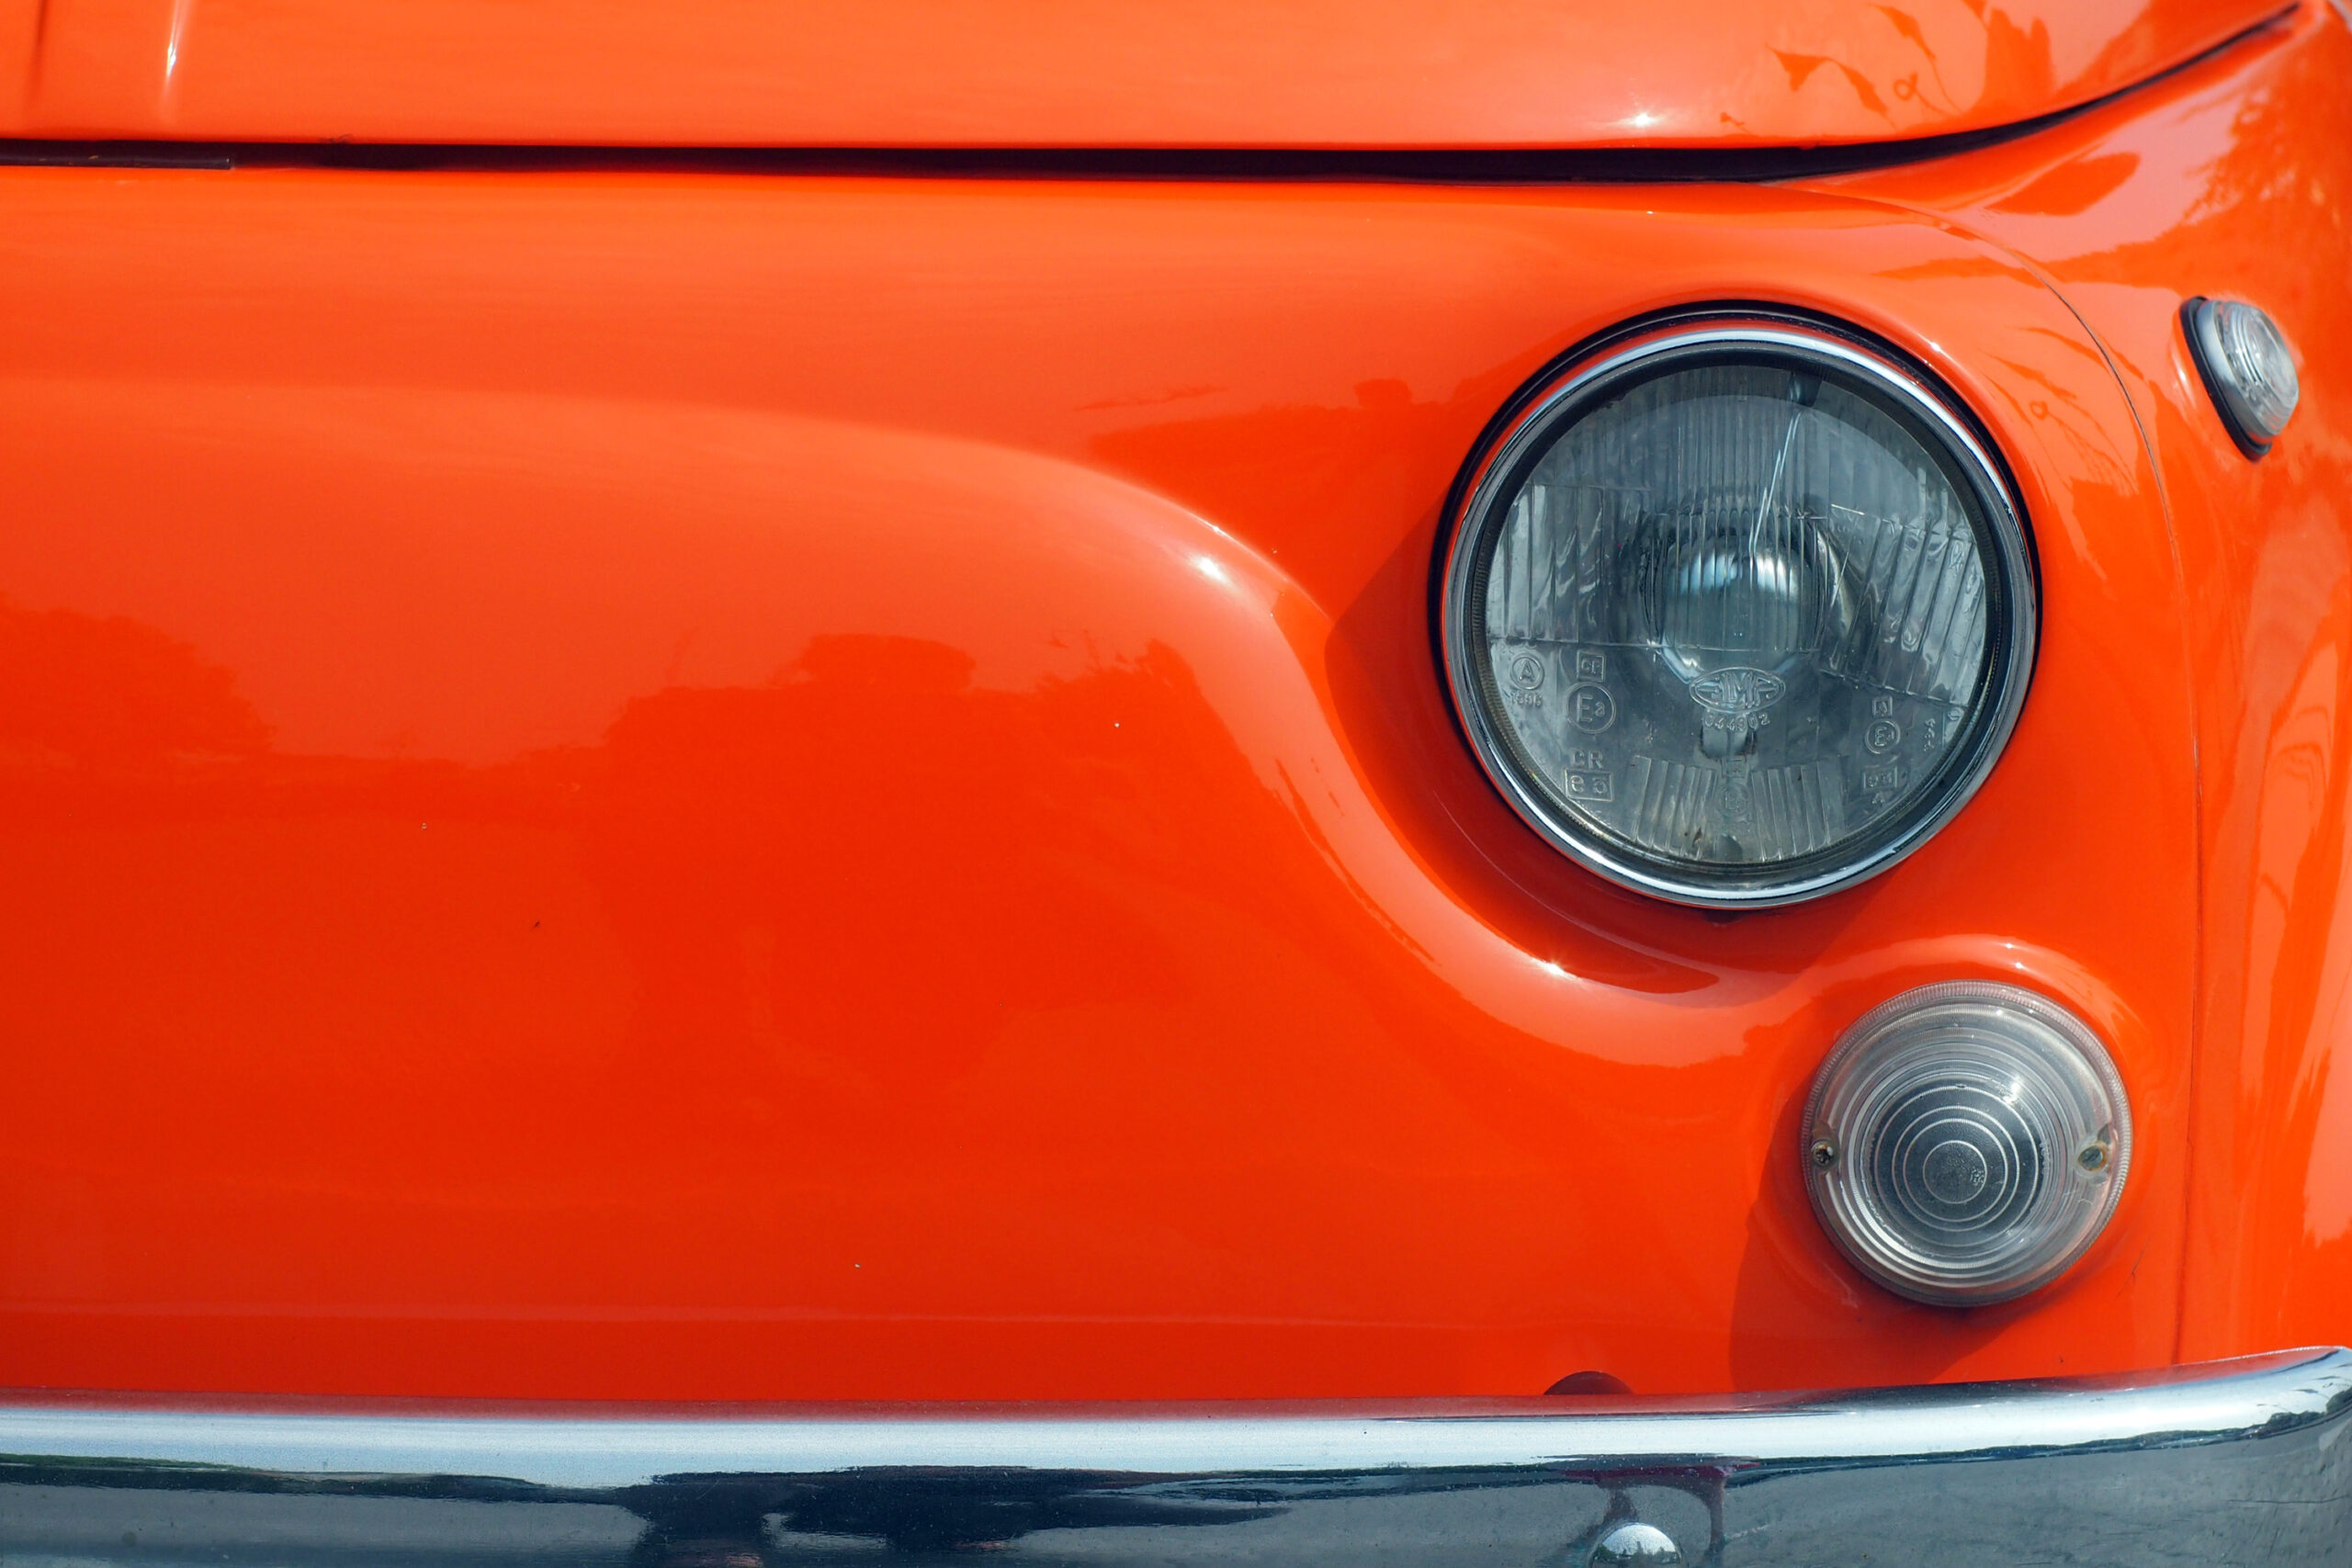 Close-up of an orange Fiat car's front headlight and turn signal, highlighting the details necessary for Fiat mechanic and servicing.